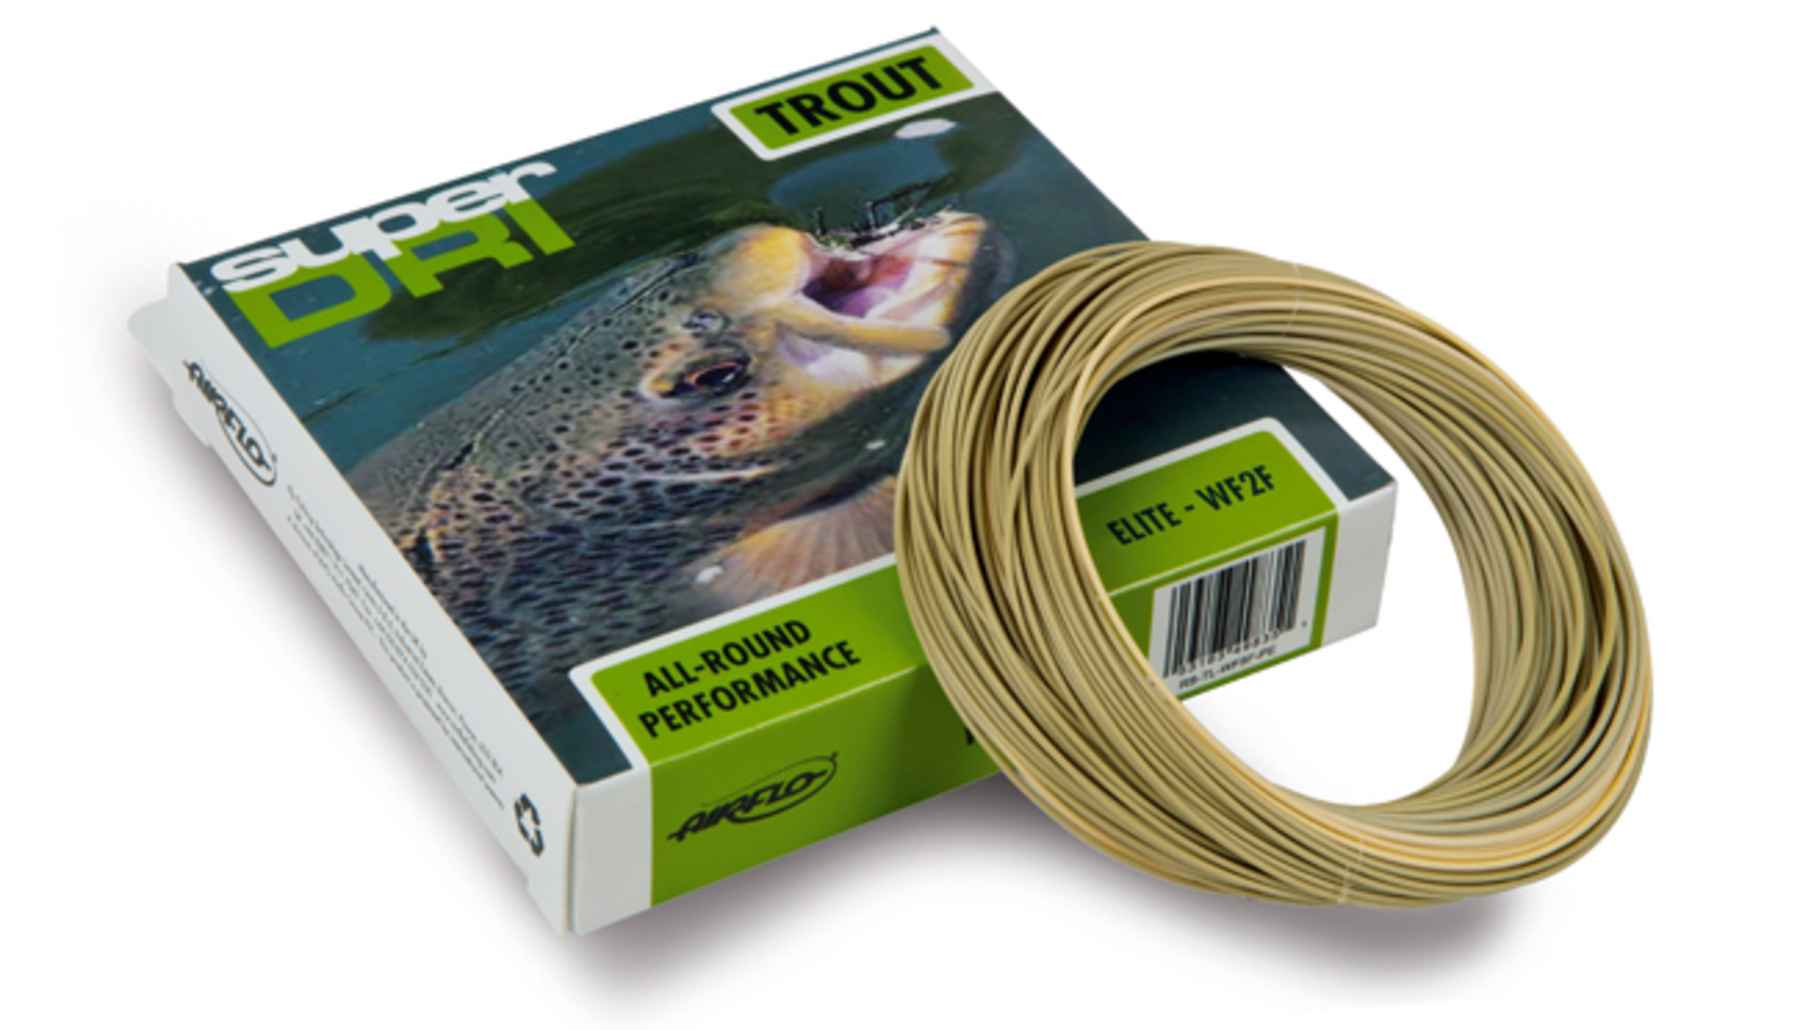 Airflo Velocity Fly Line Wf8f Optic Green for sale online